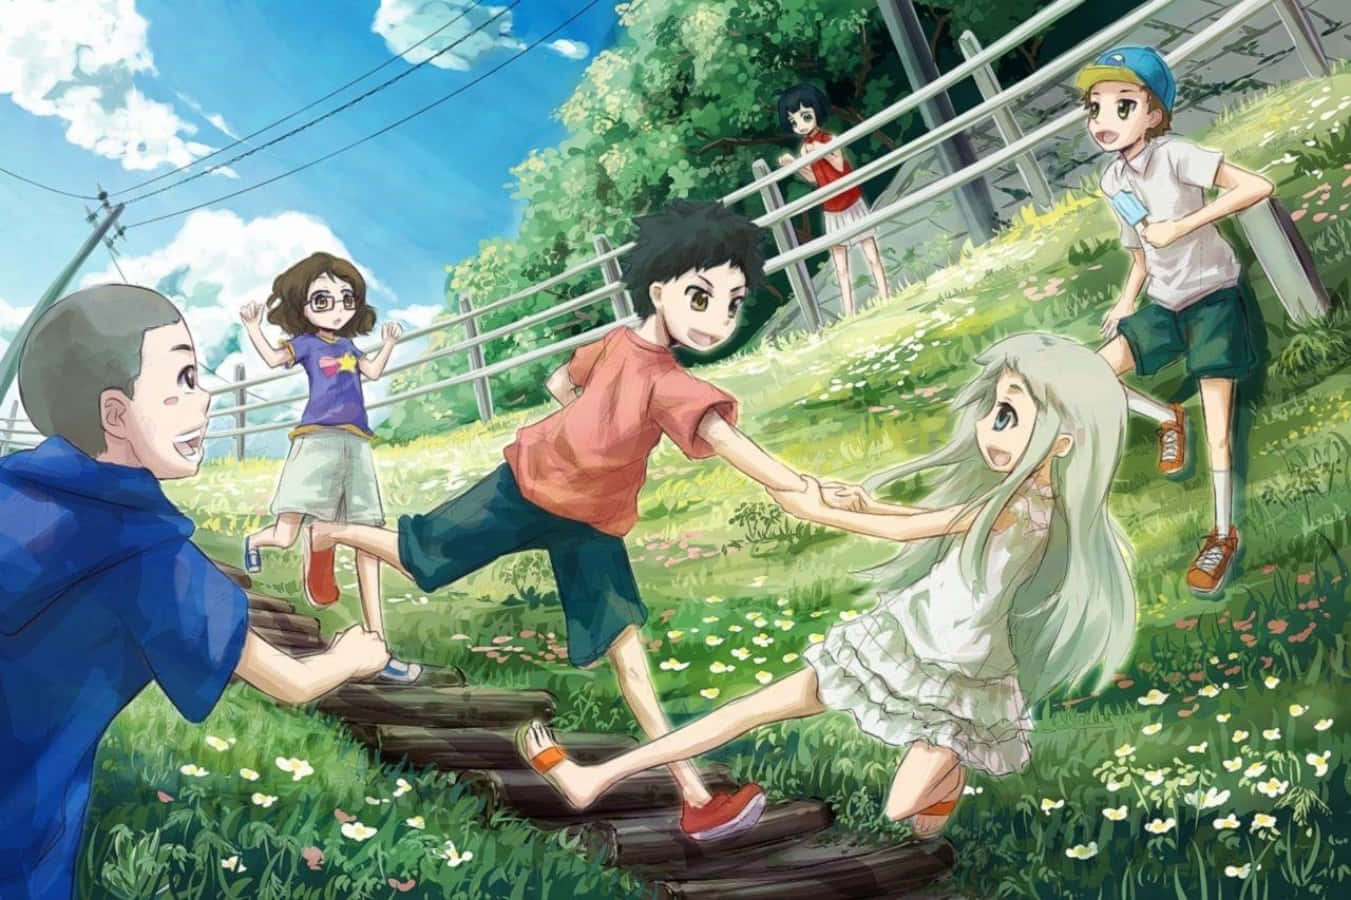 Friends Reunited in Anohana